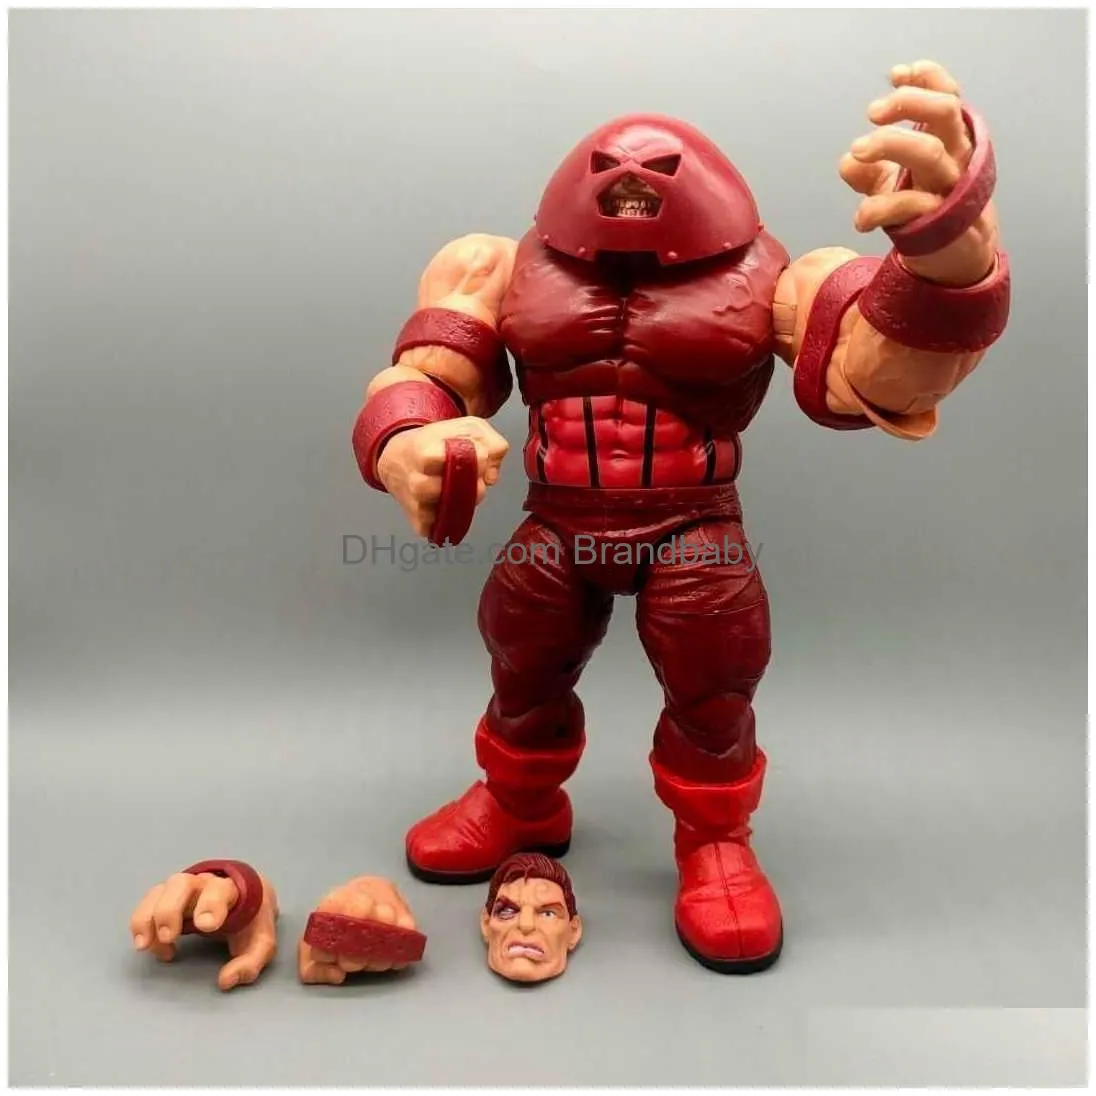 Action & Toy Figures Legends Xmen Jernaut From 2-Pack Exclusive 8 Loose Figure T230810 Drop Delivery Toys Gifts Dhok5